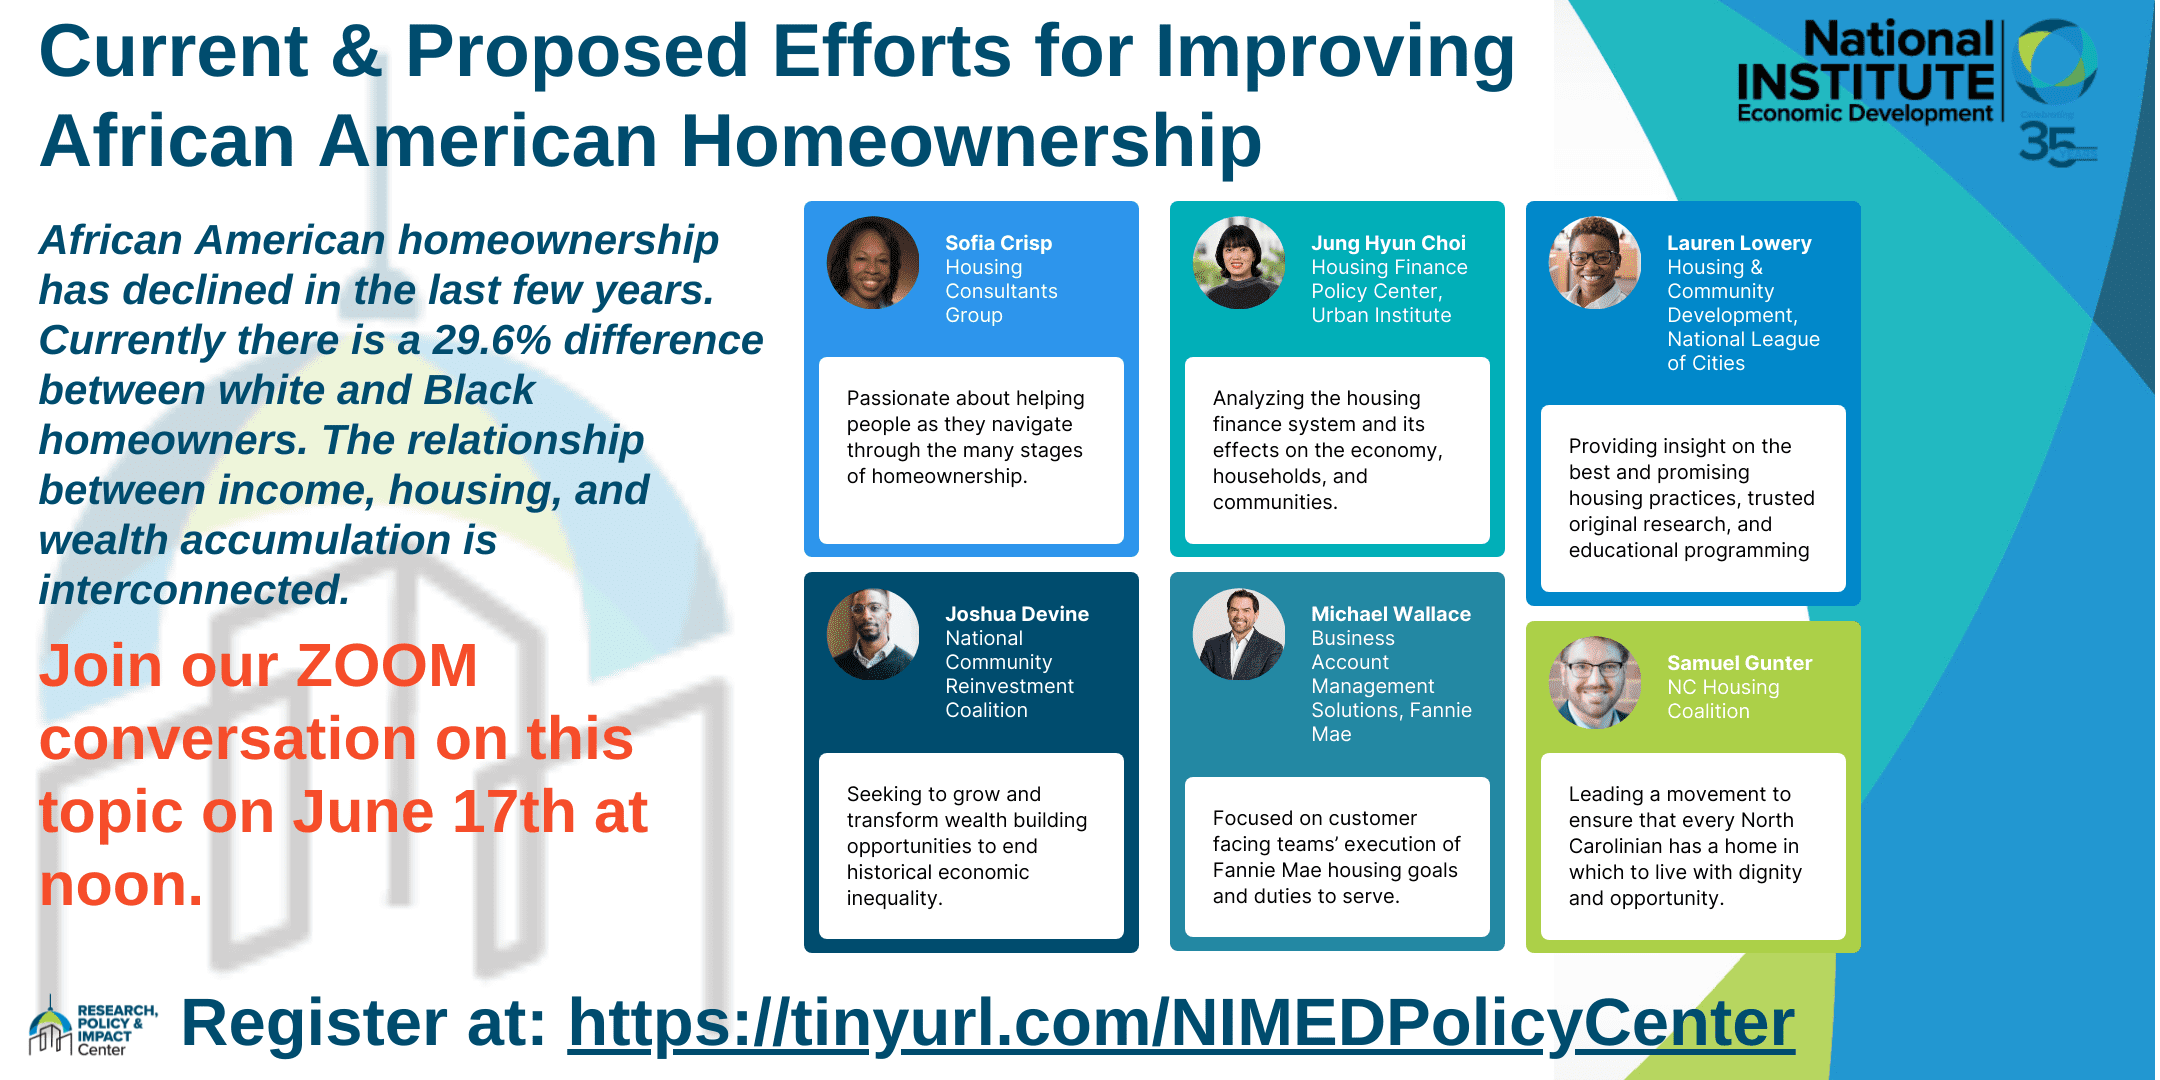 A poster on current and proposed efforts for African American Home ownership